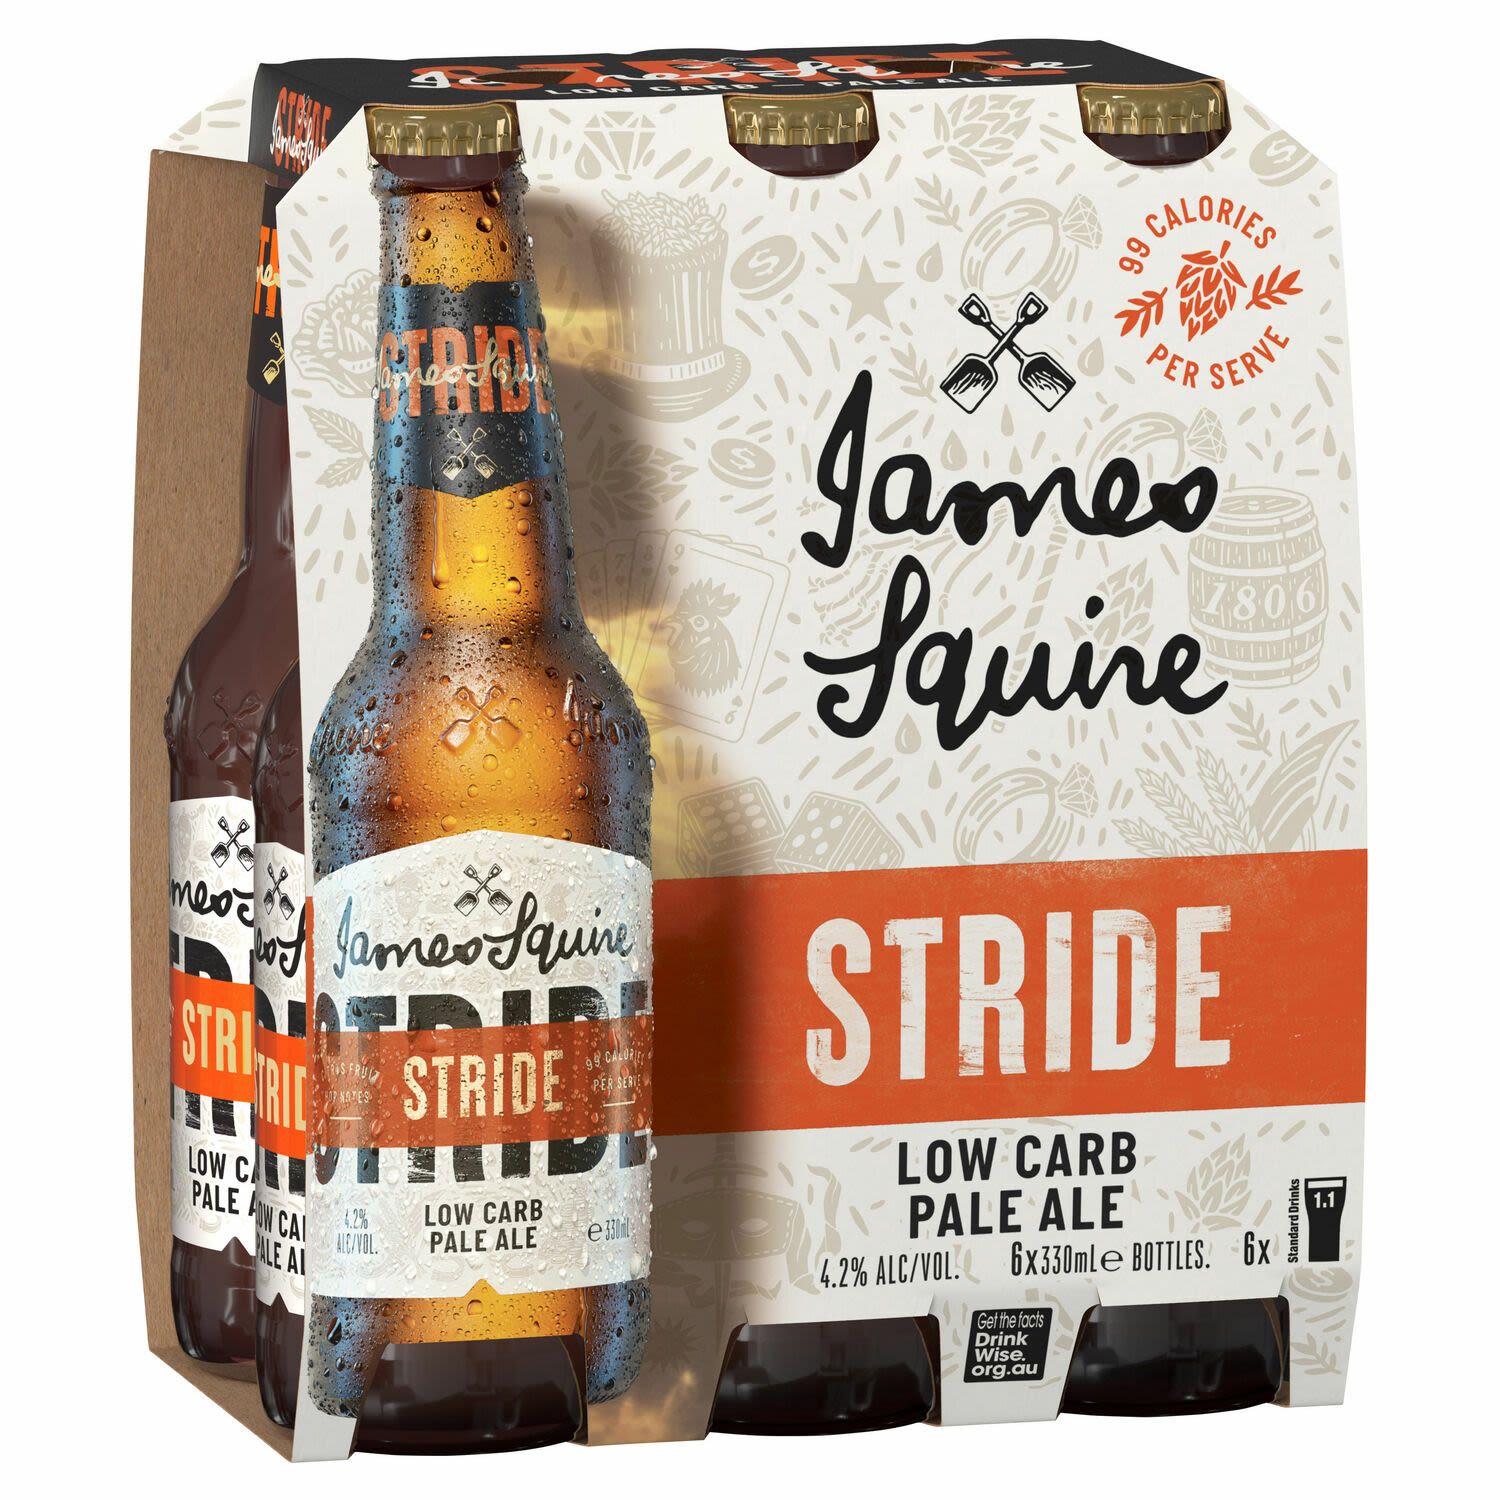 James Squire Stride Bottle 330mL 6 Pack